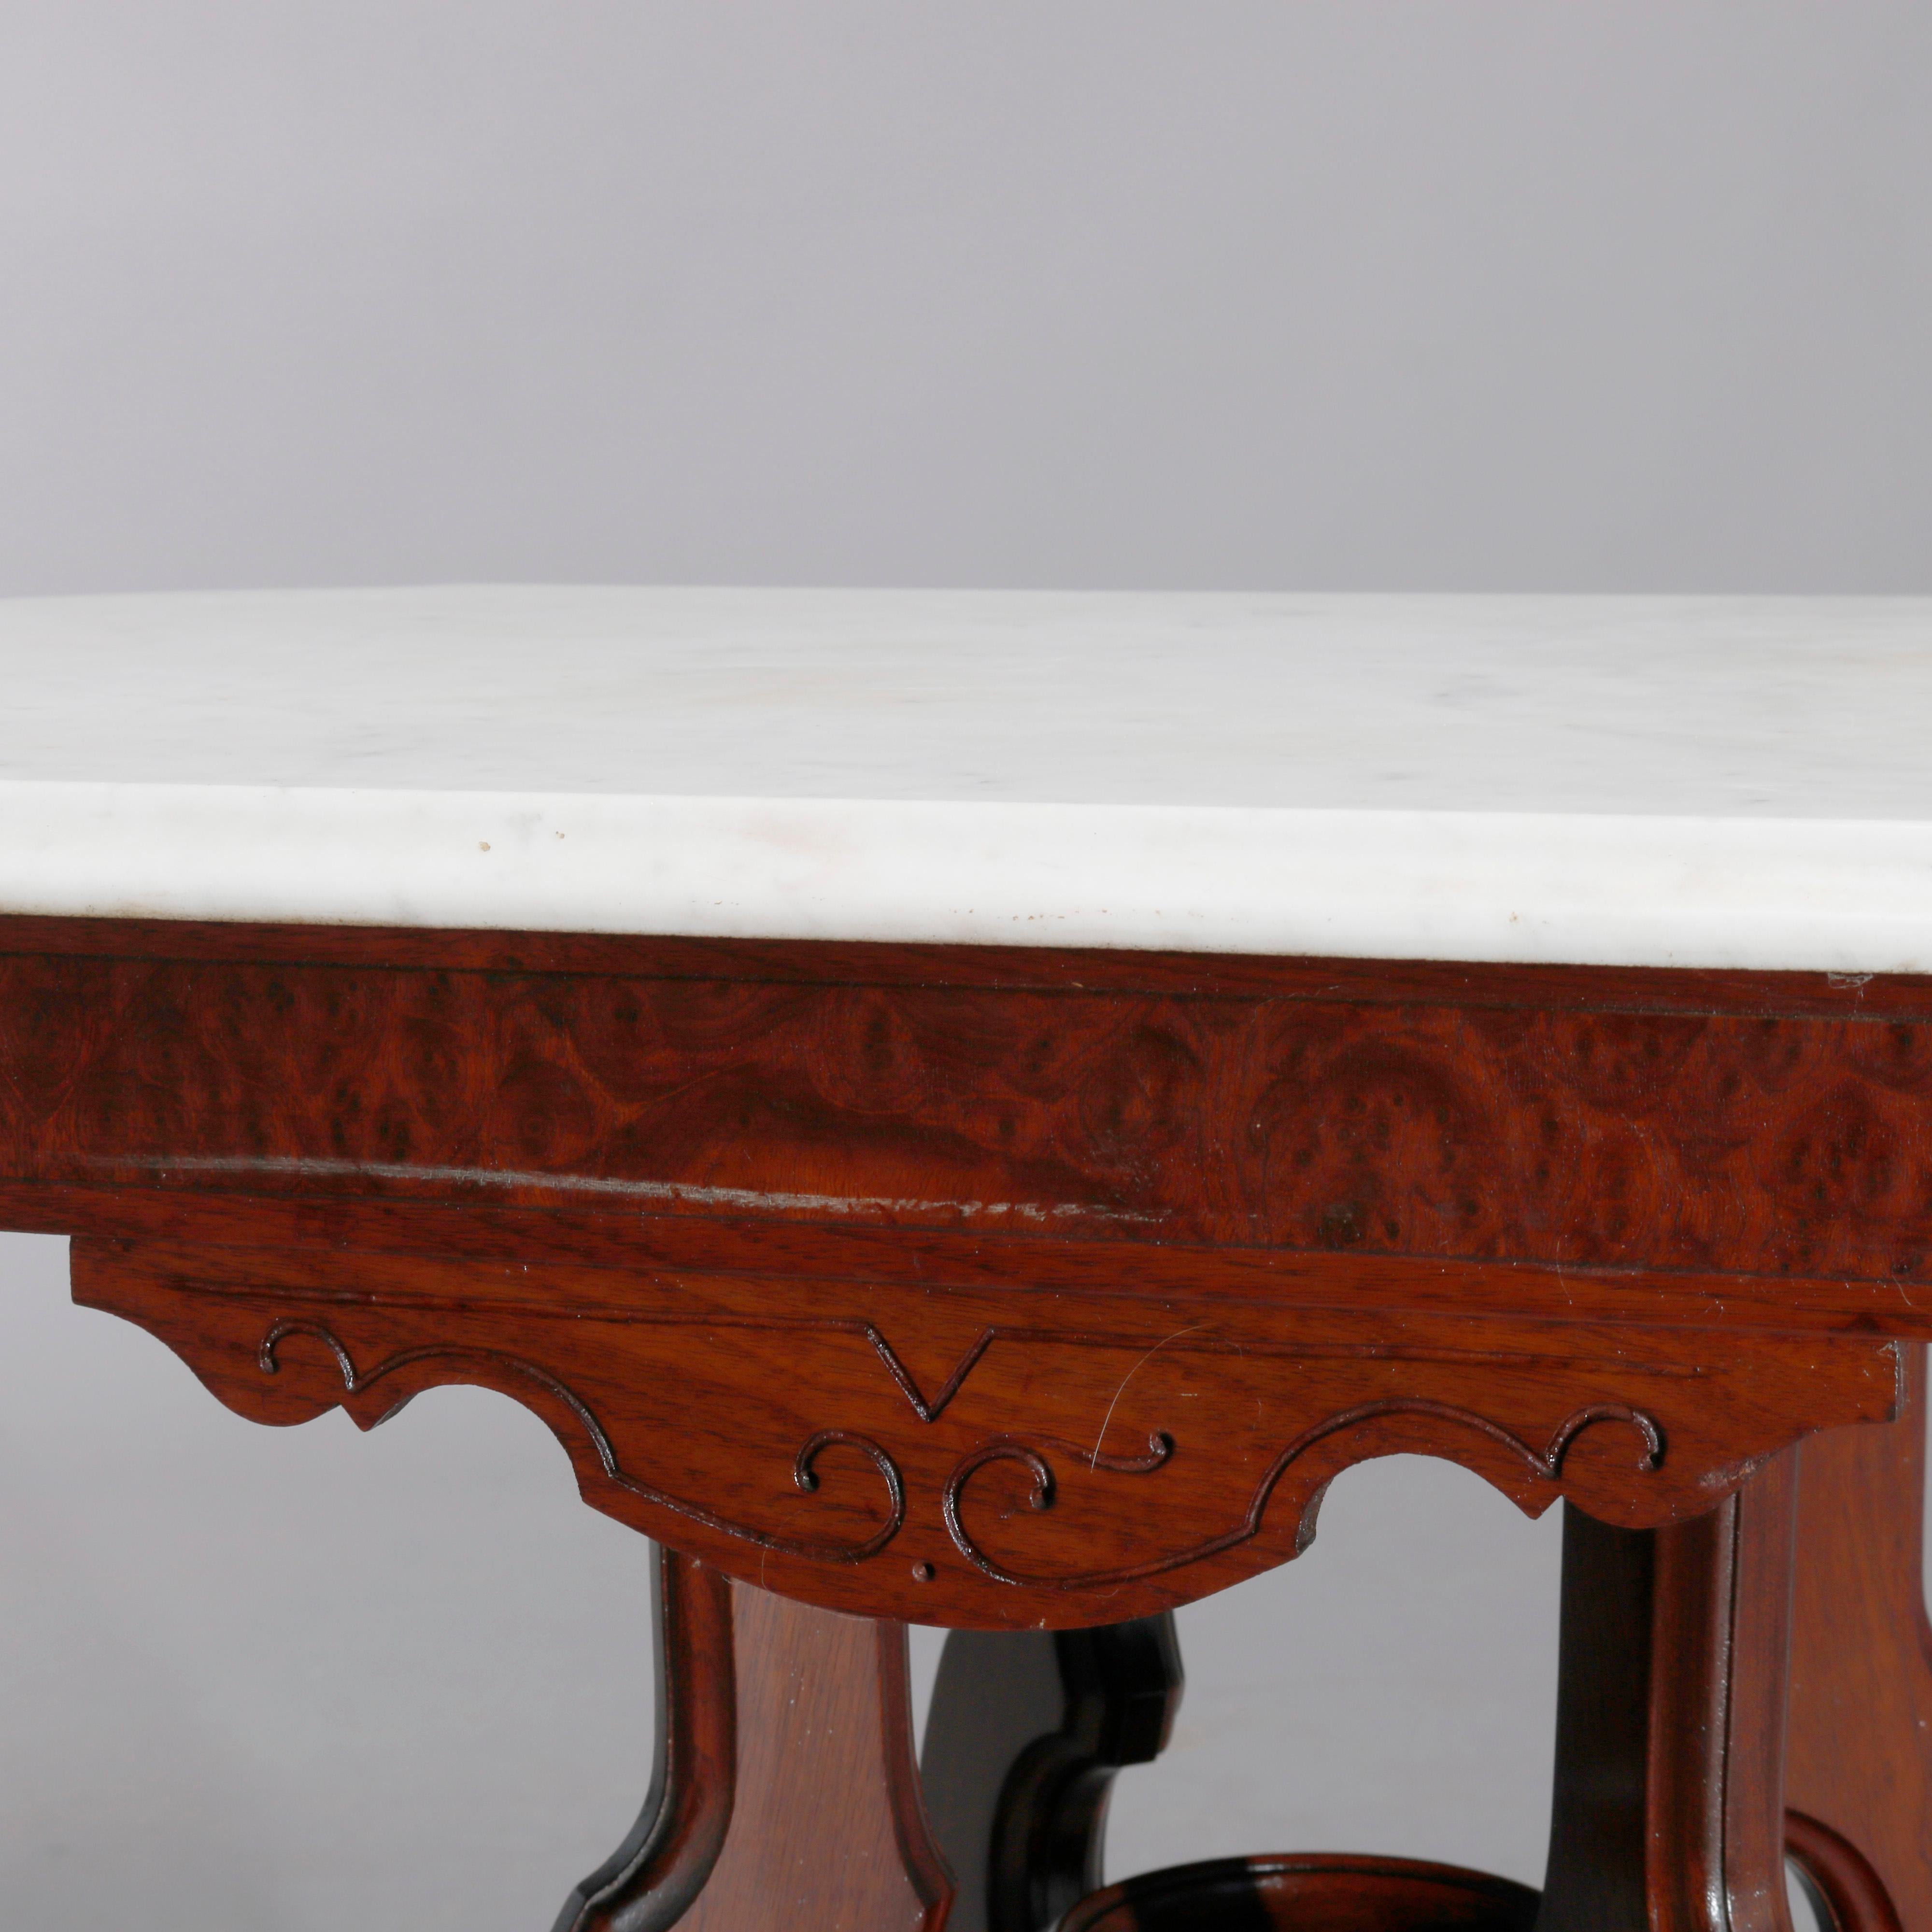 An antique Eastlake center table offers shaped beveled marble top surmounting carved walnut and burl base raised on shaped legs with central urn form finial, c1890.

Measures: 30.25